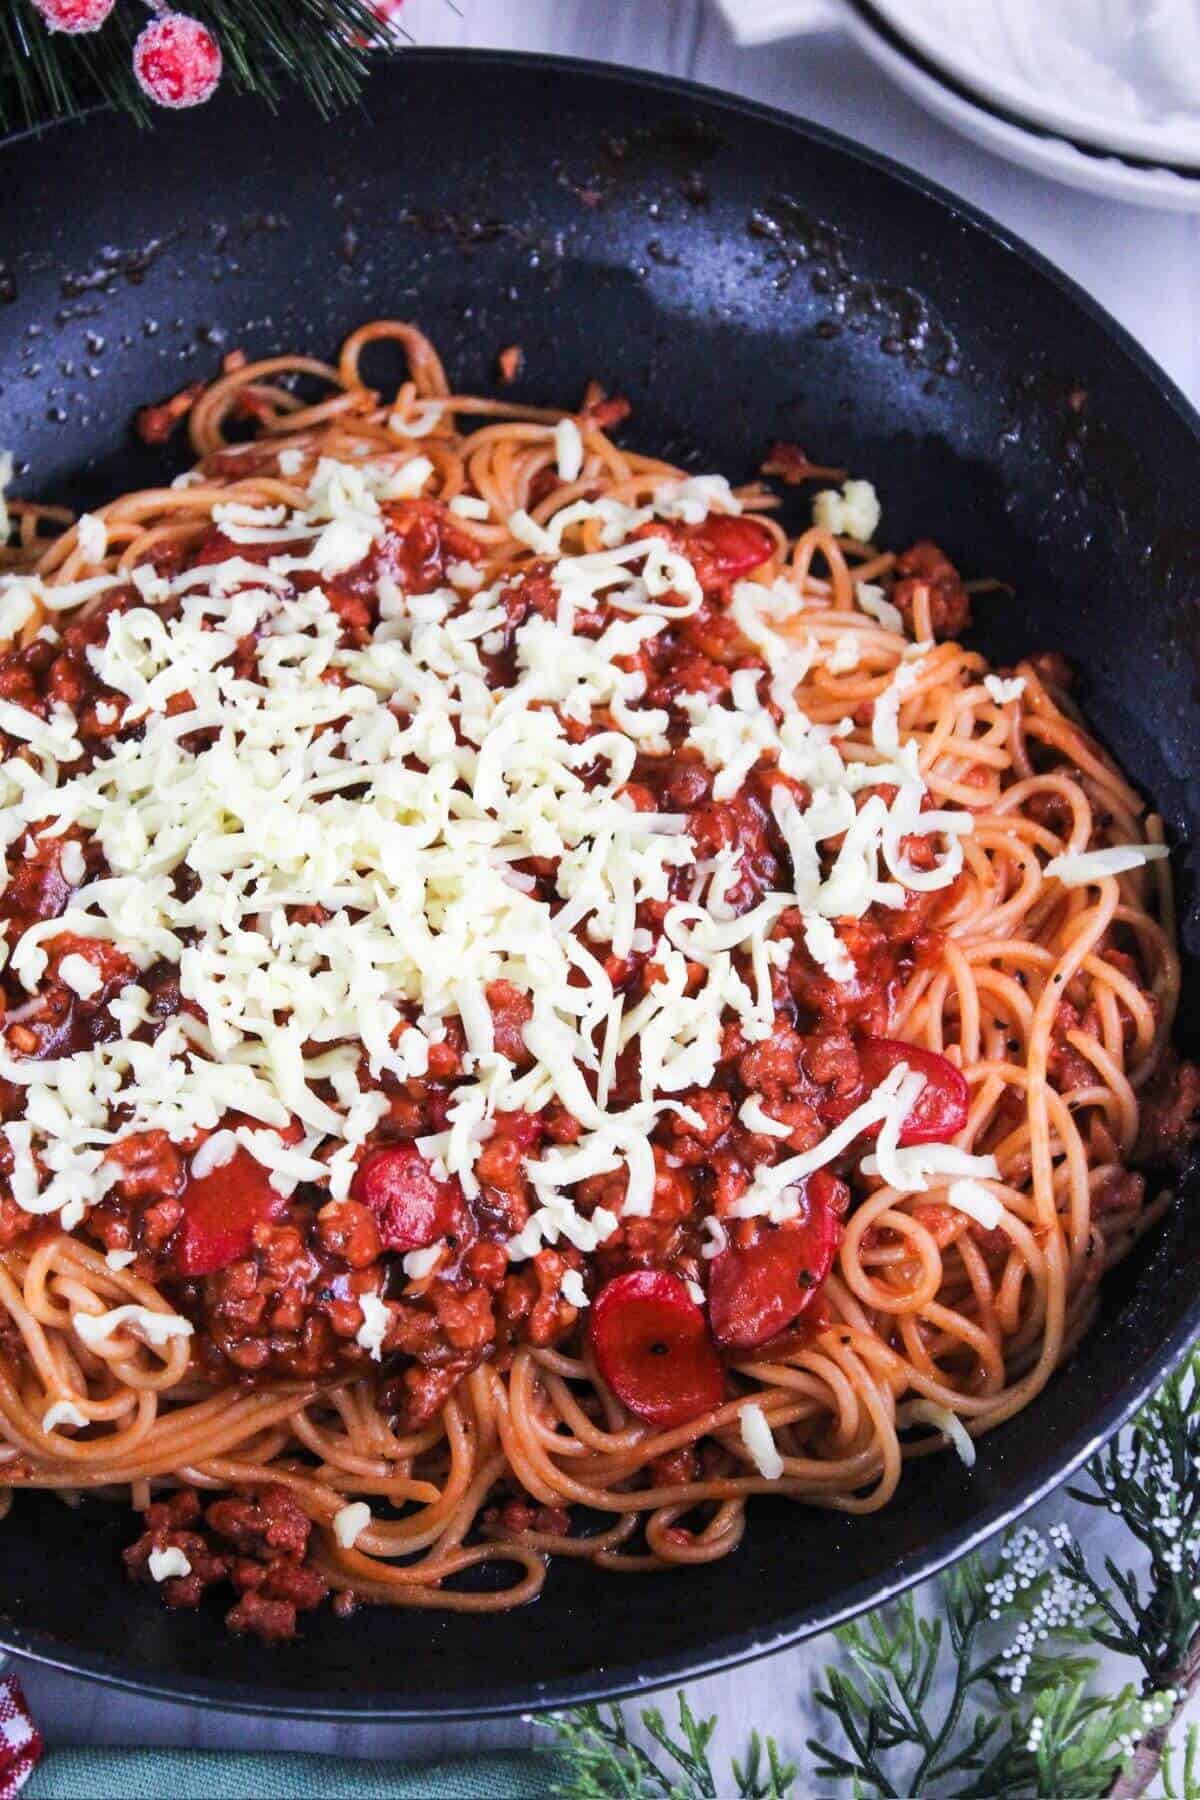 Filipino spaghetti and meat sauce topped with cheese in a frying pan.